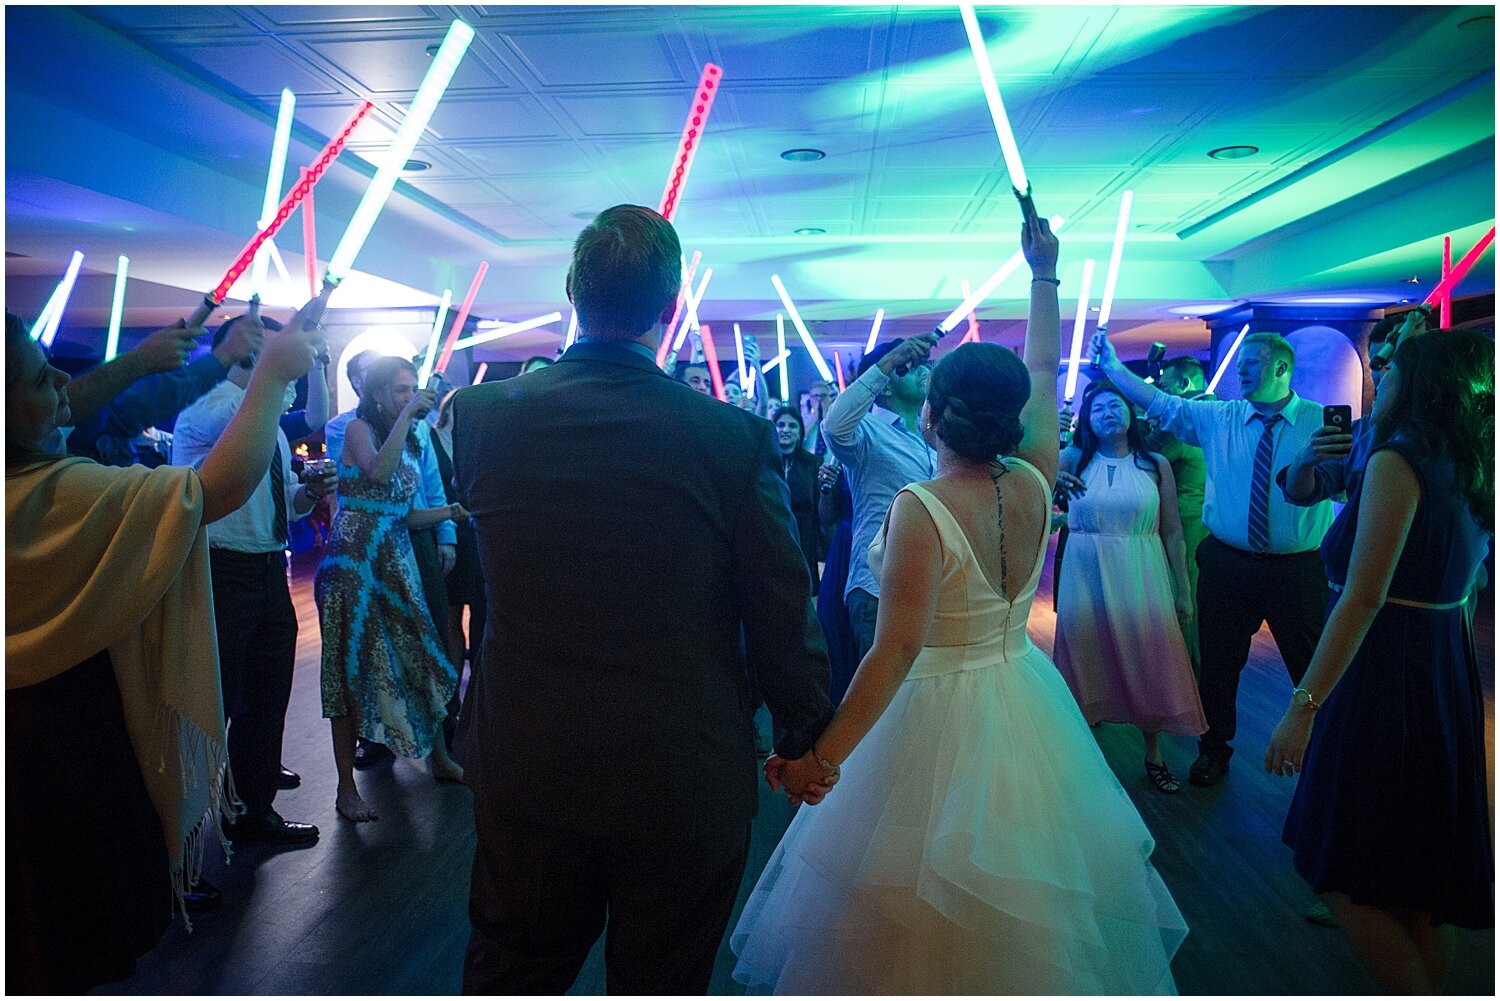  Lightsabers for the wedding guests  